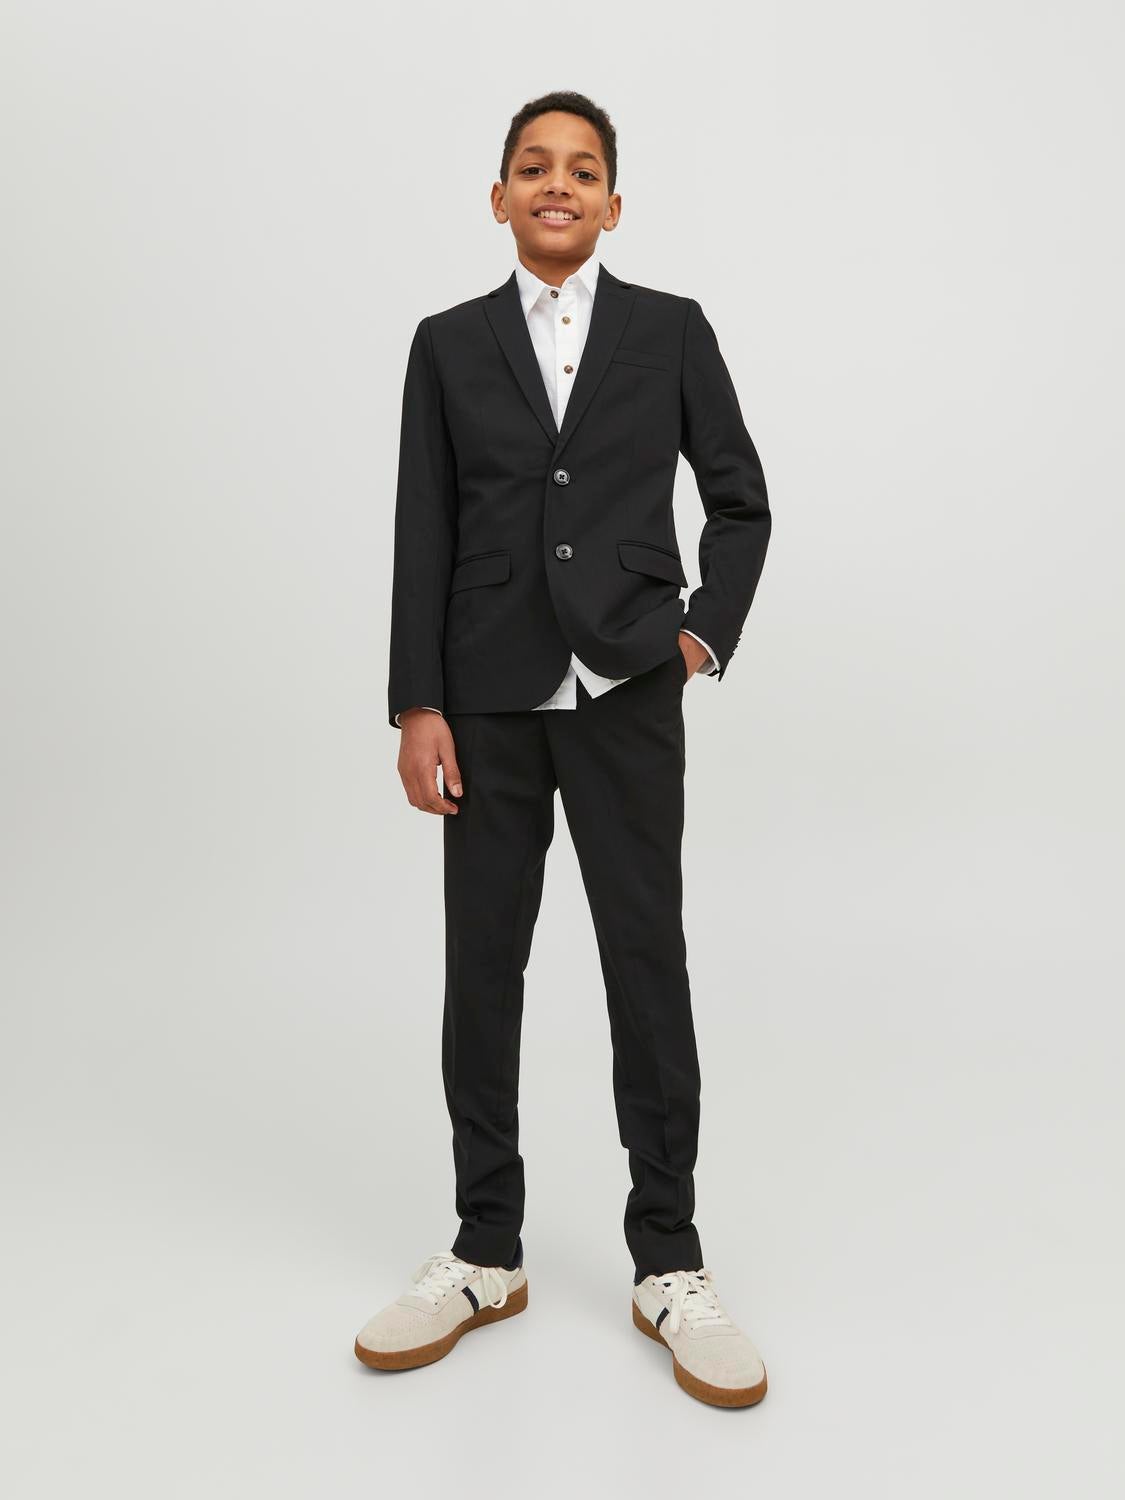 Buy Black Suit With TIE for Boys of all ages. (Small 3-6 Months) at  Amazon.in